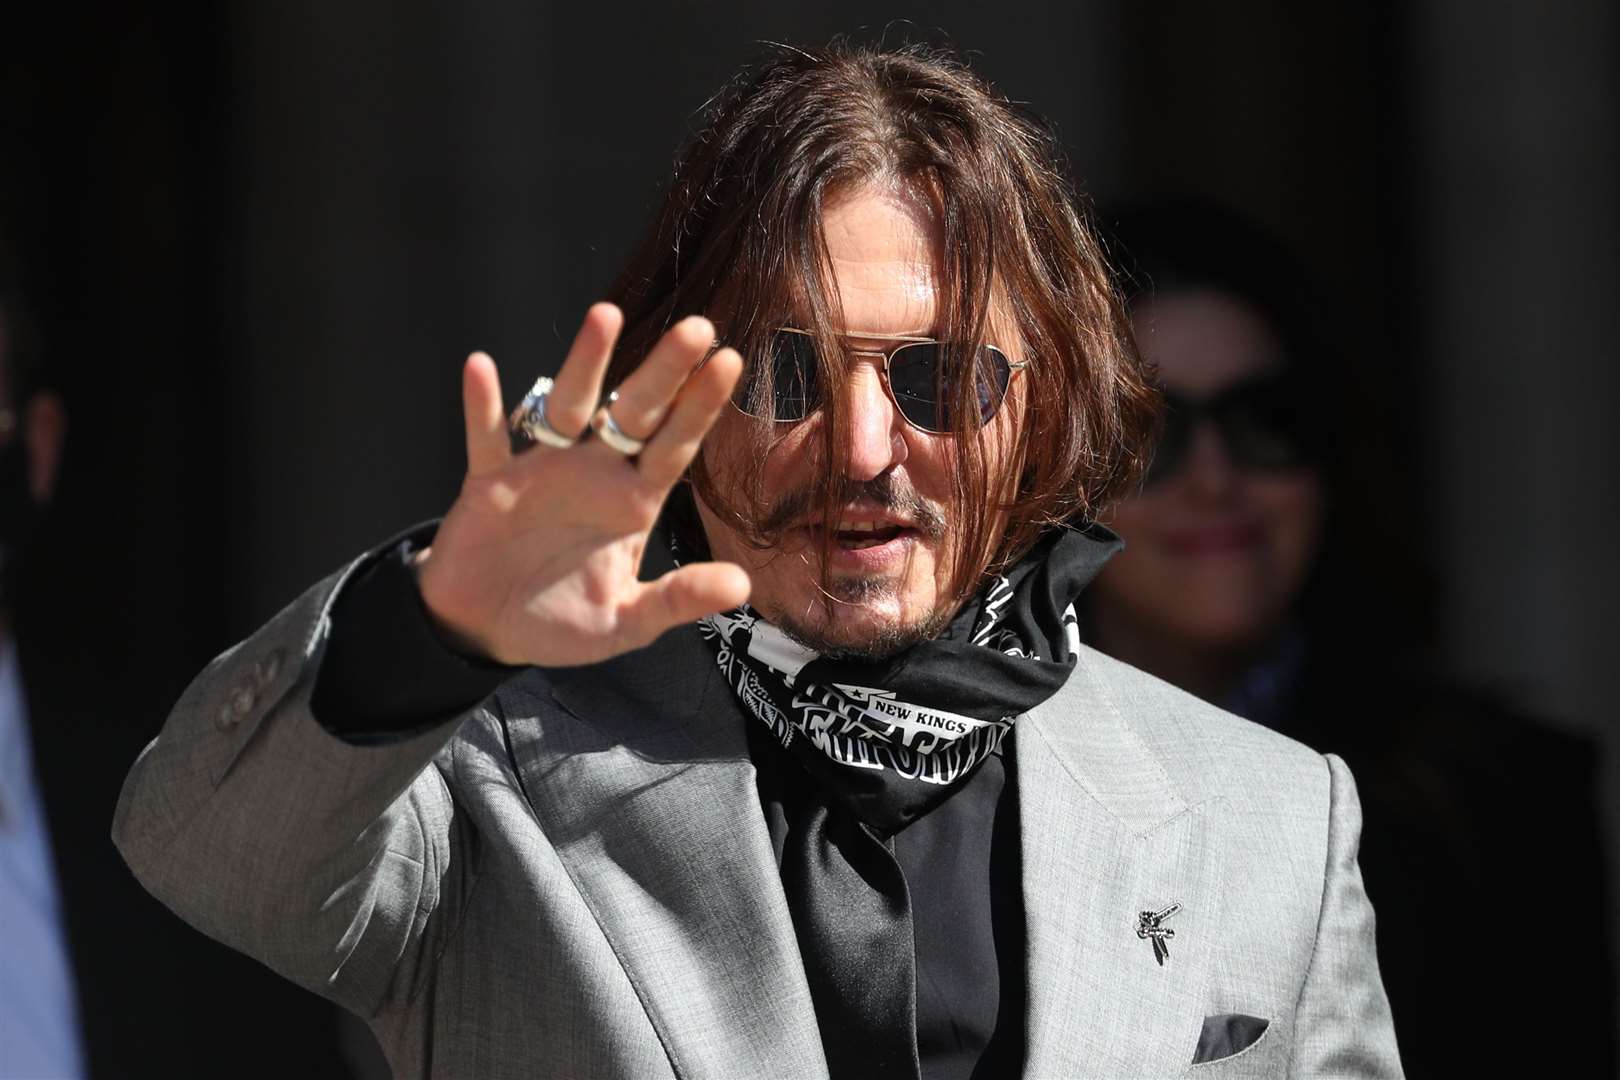 Johnny Depp outside the Royal Courts of Justice in London in July (Yui Mok/PA)